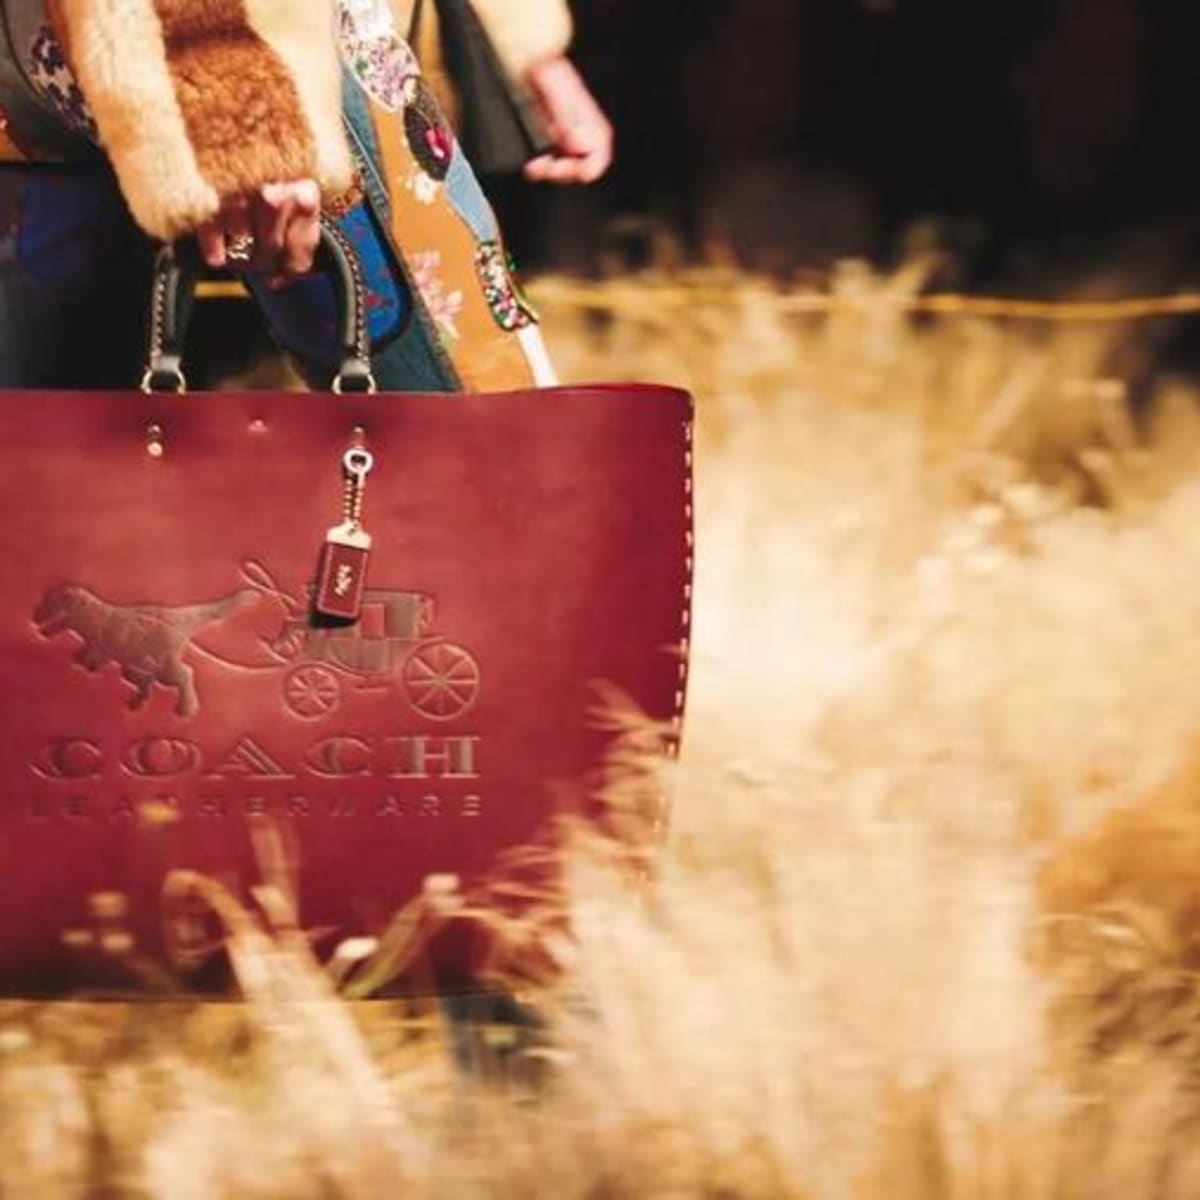 Why Is Coach Changing Its Name?